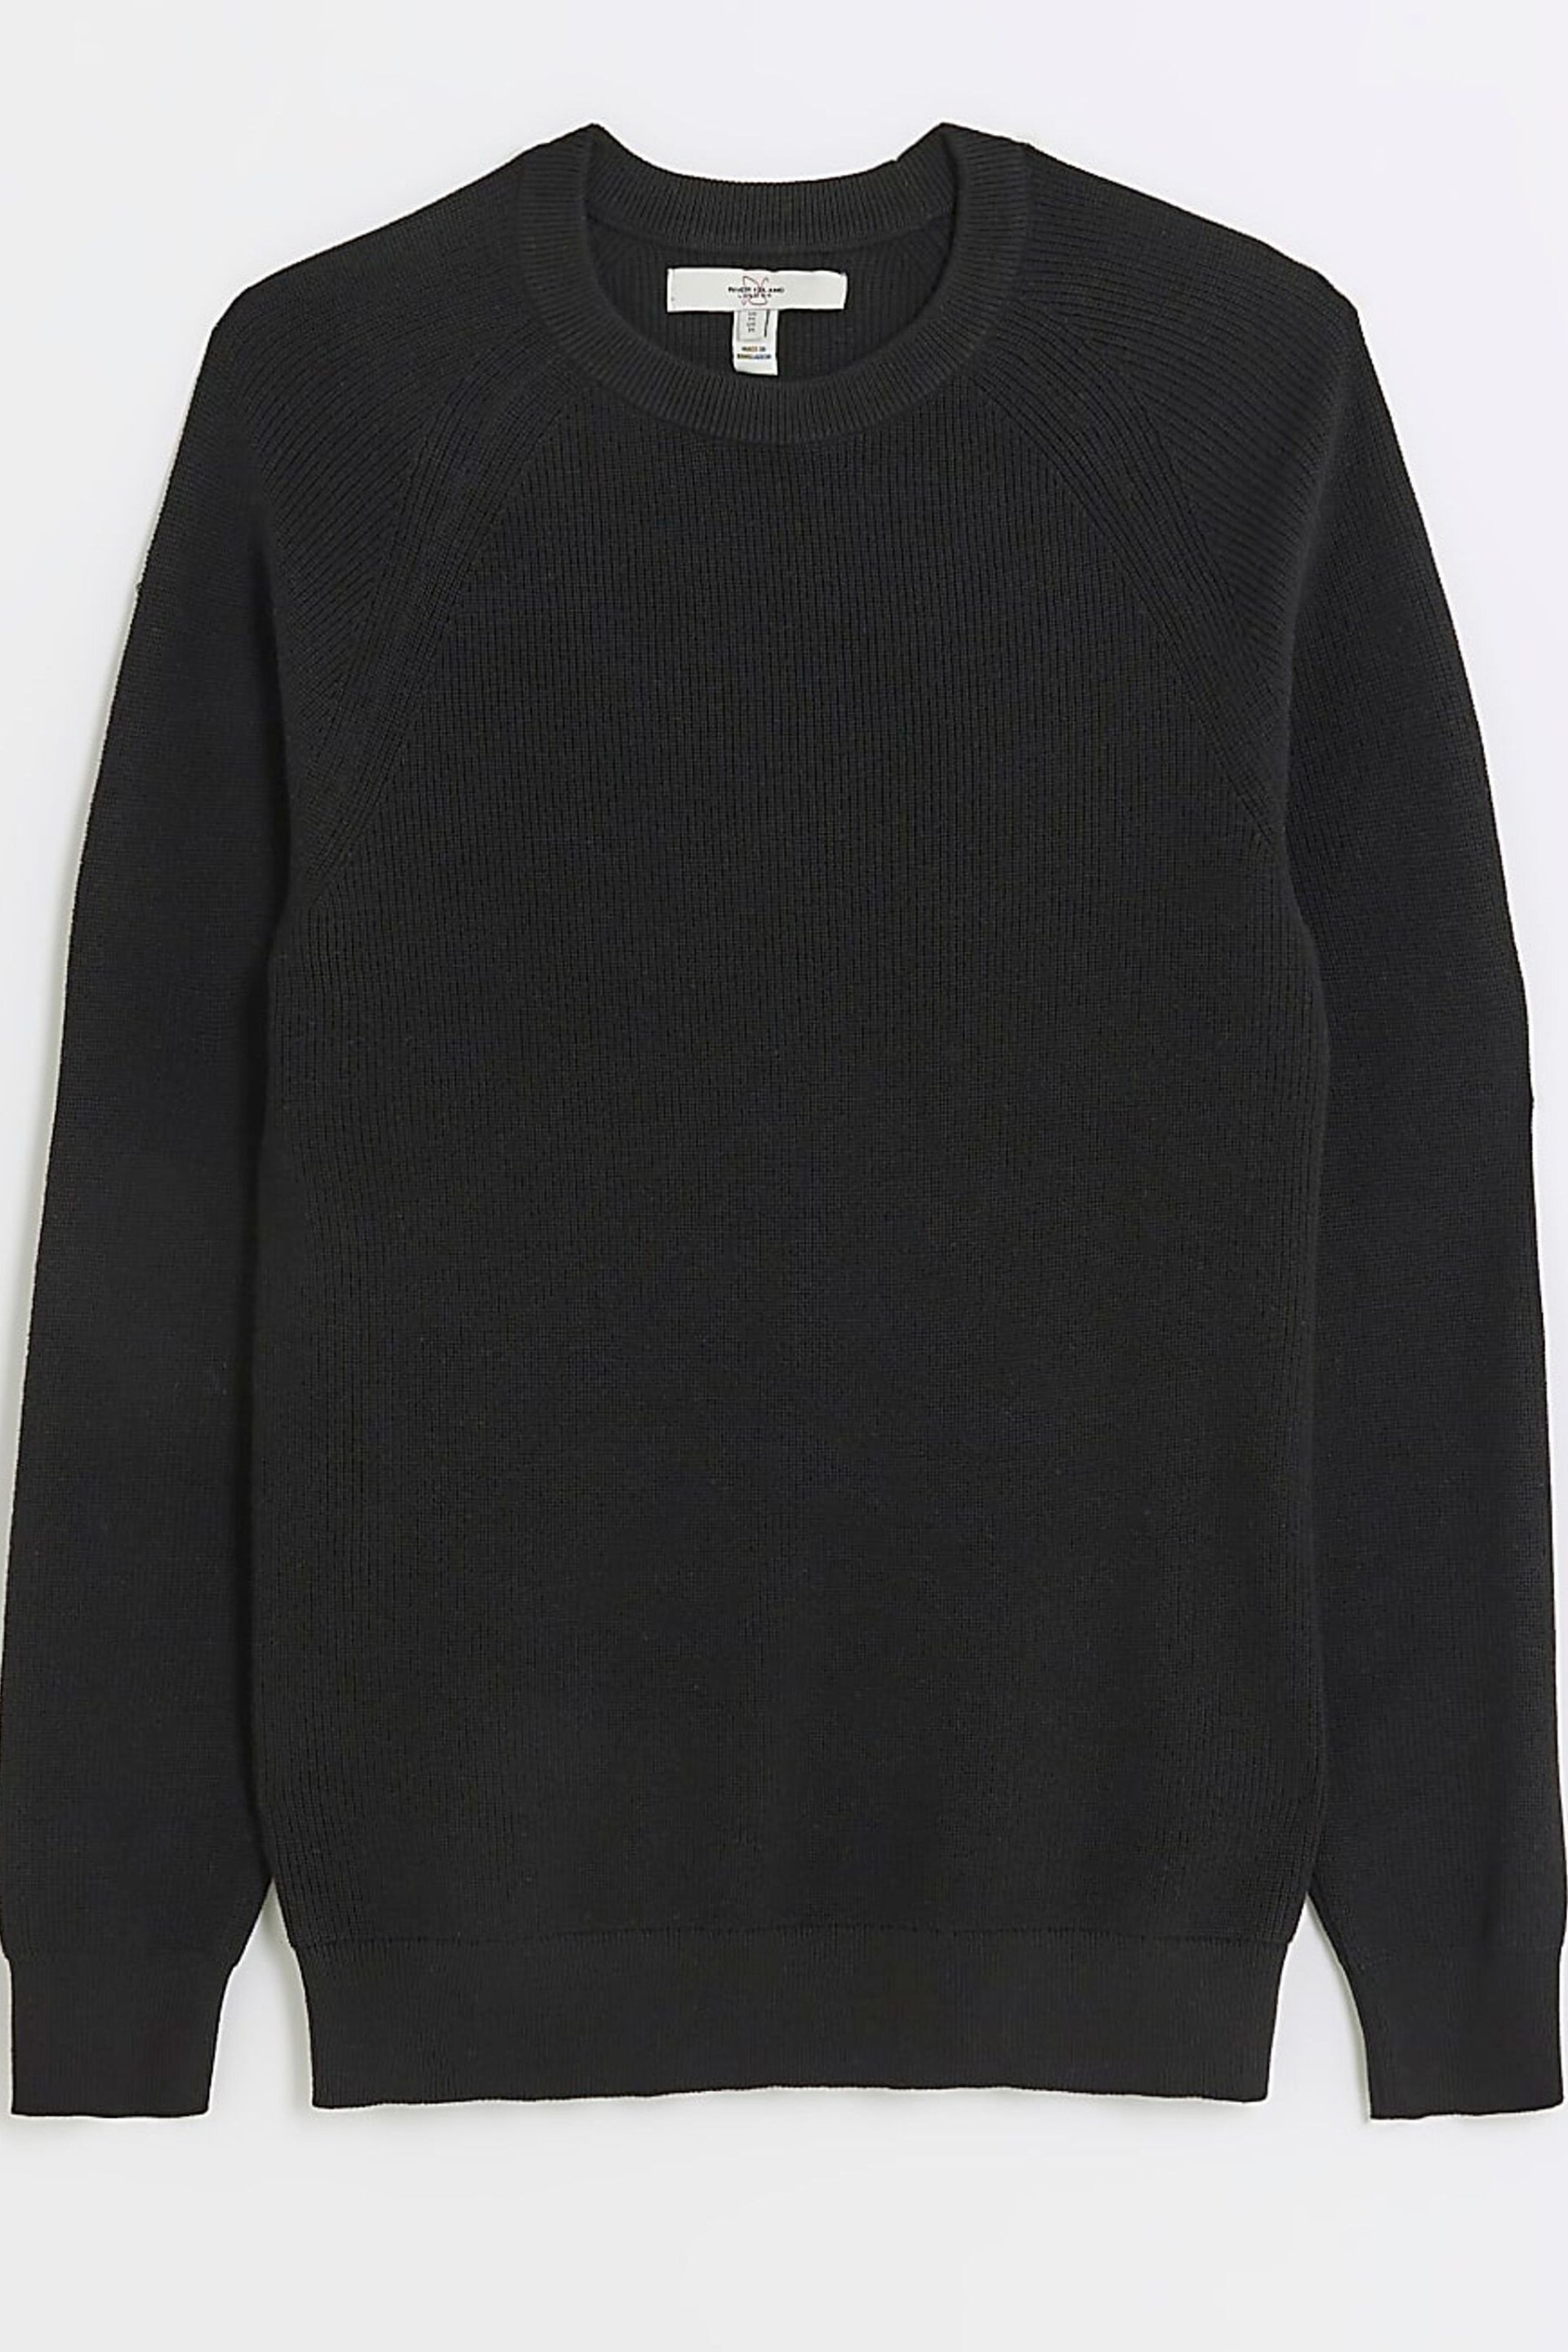 River Island Black Muscle Fit Rib Crew Jumper - Image 5 of 6